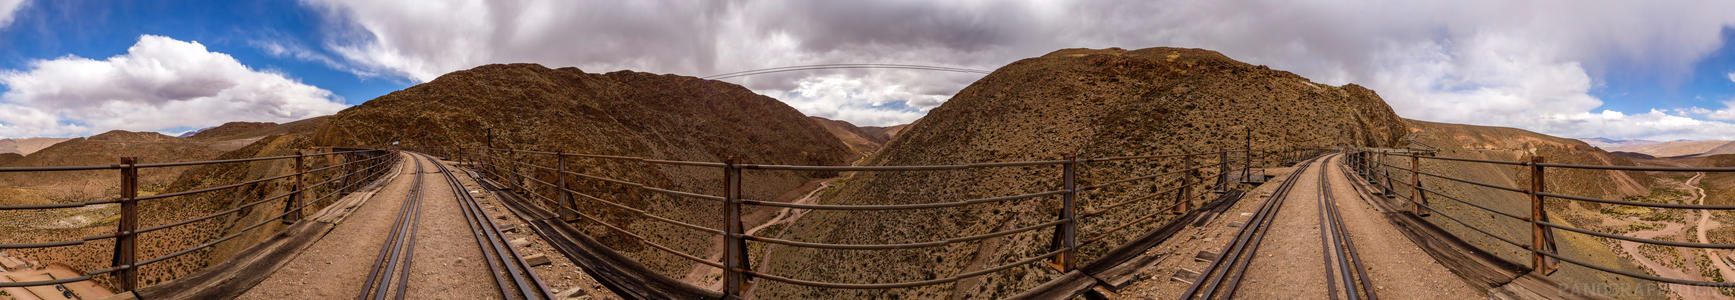 At the Center of Viaducto la Polvorilla - A full 360 degree view from the center of the train bridge at the end of the Train into the Clouds